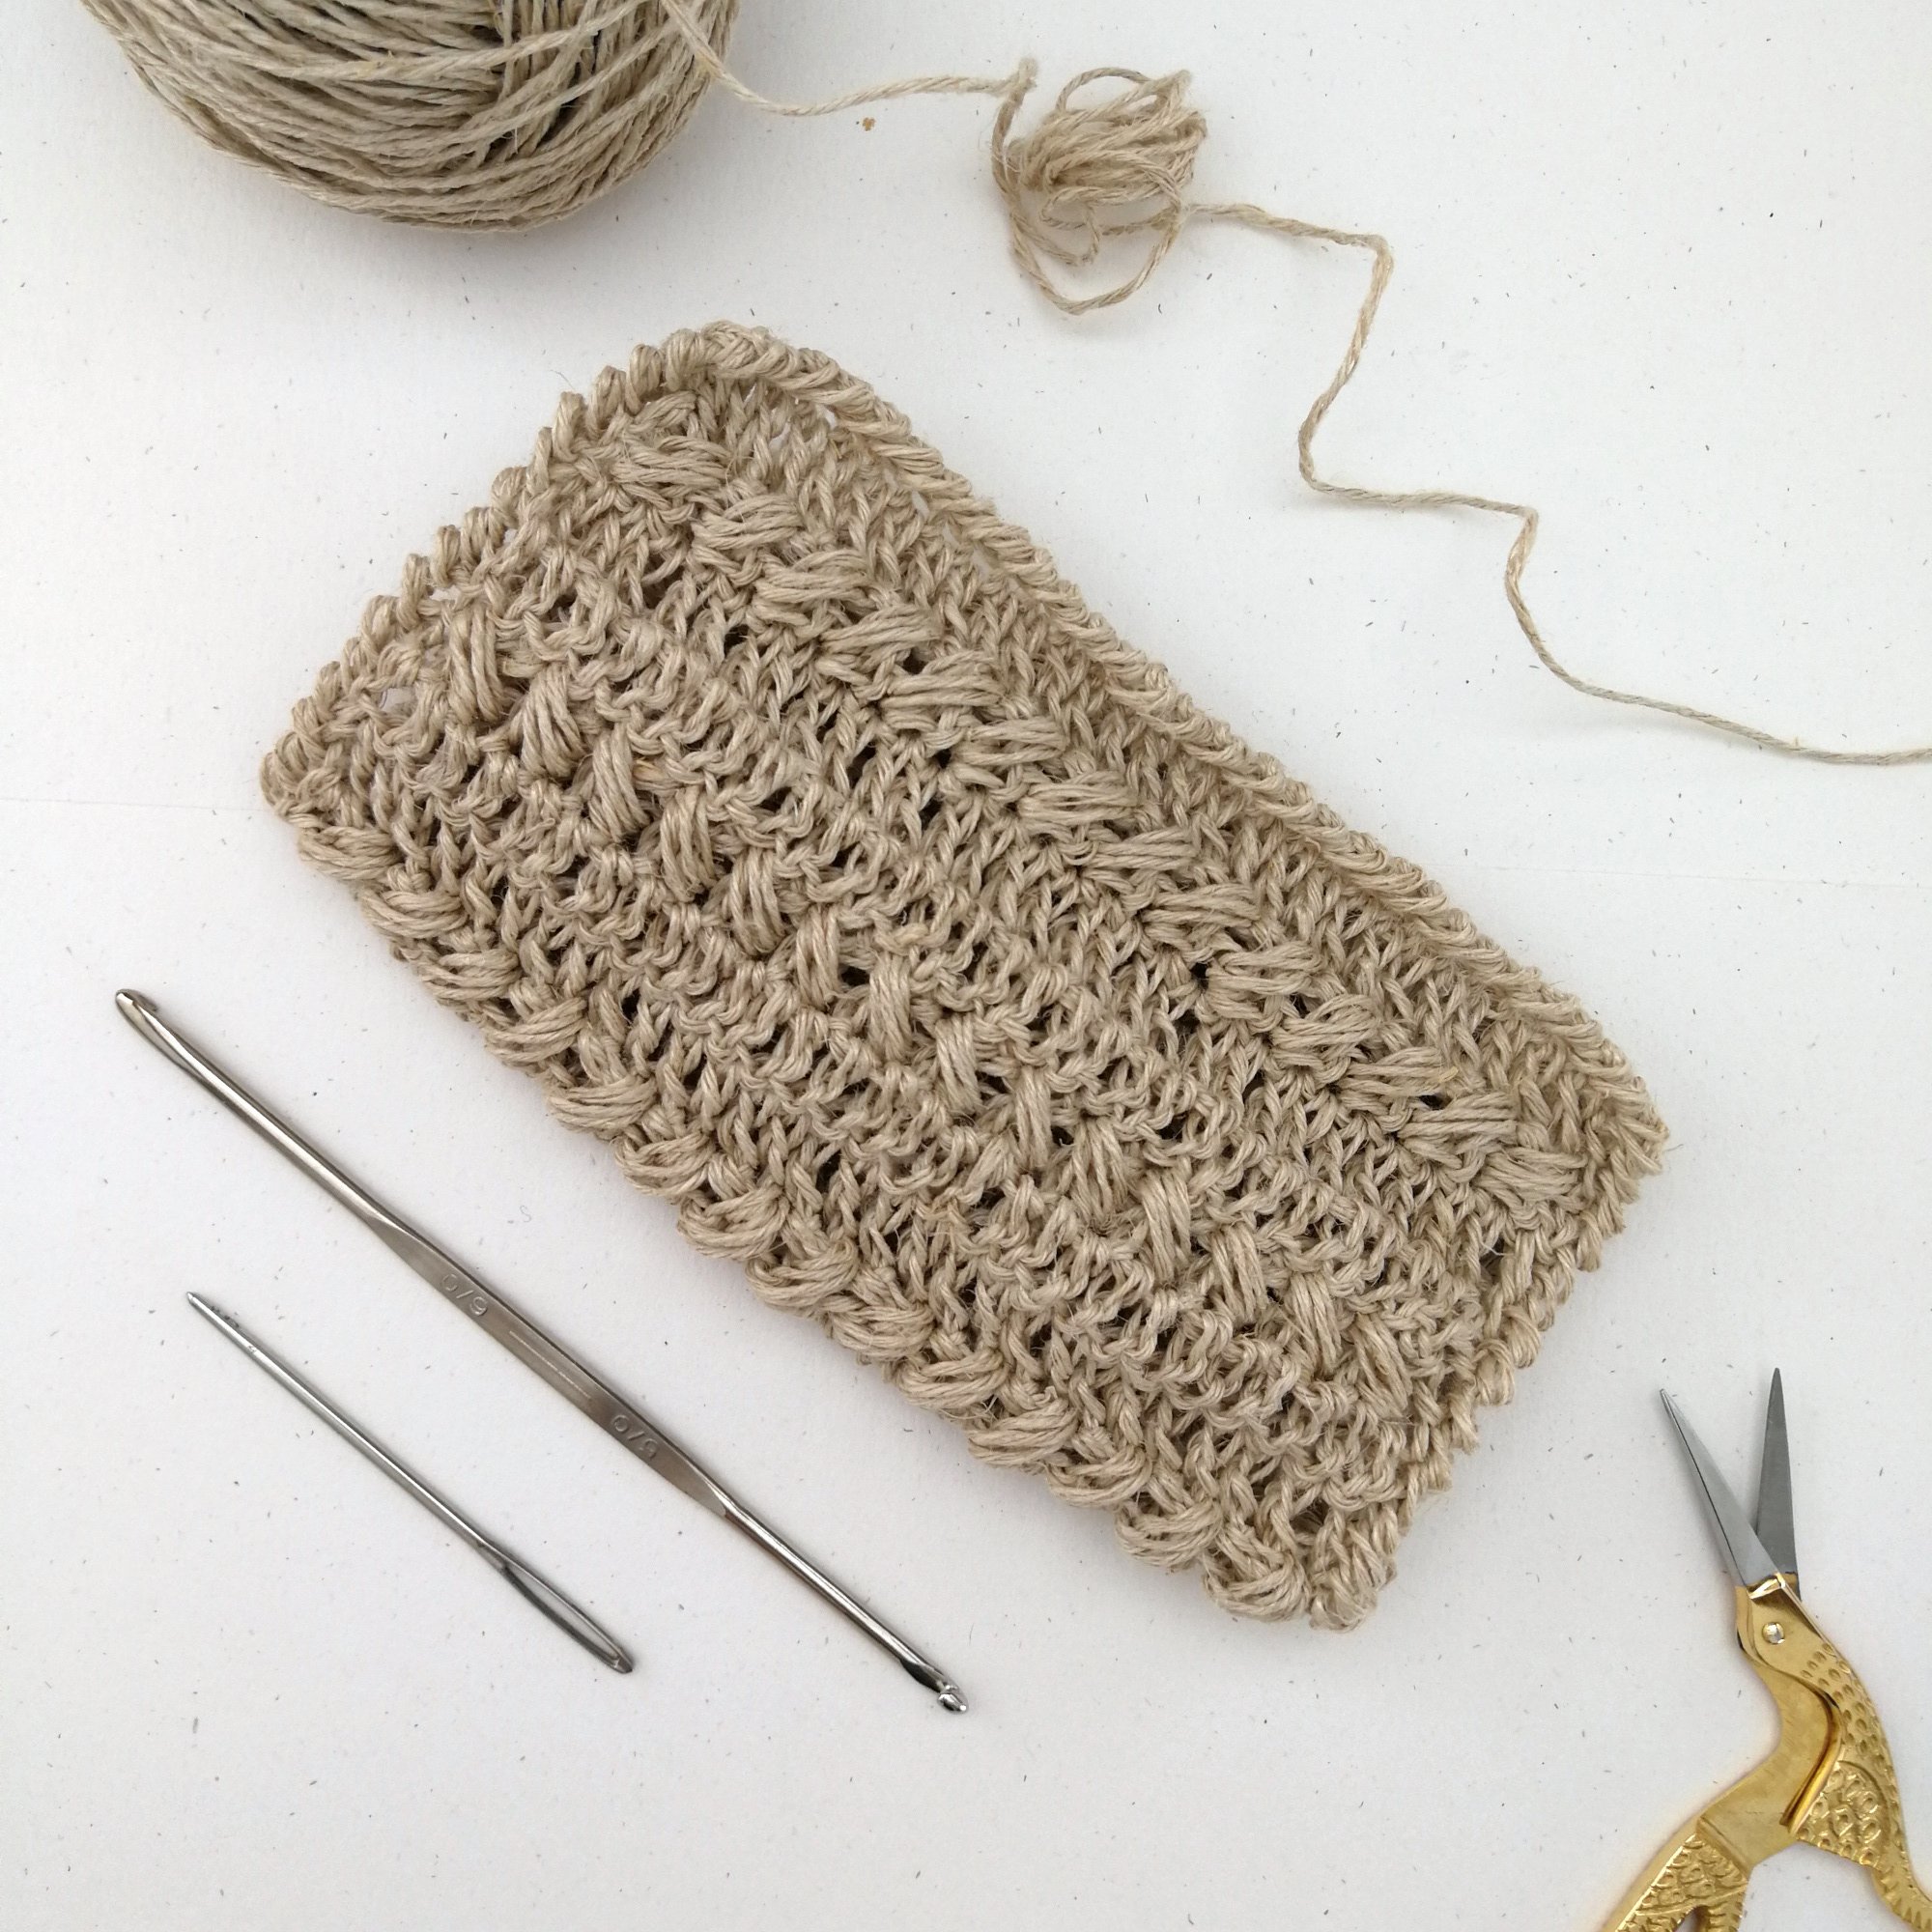 A square, textured dishcloth made with using the crochet pattern is laid out on a white table in a diamond shape. There are alternating rows of textured stitches and a textured border.